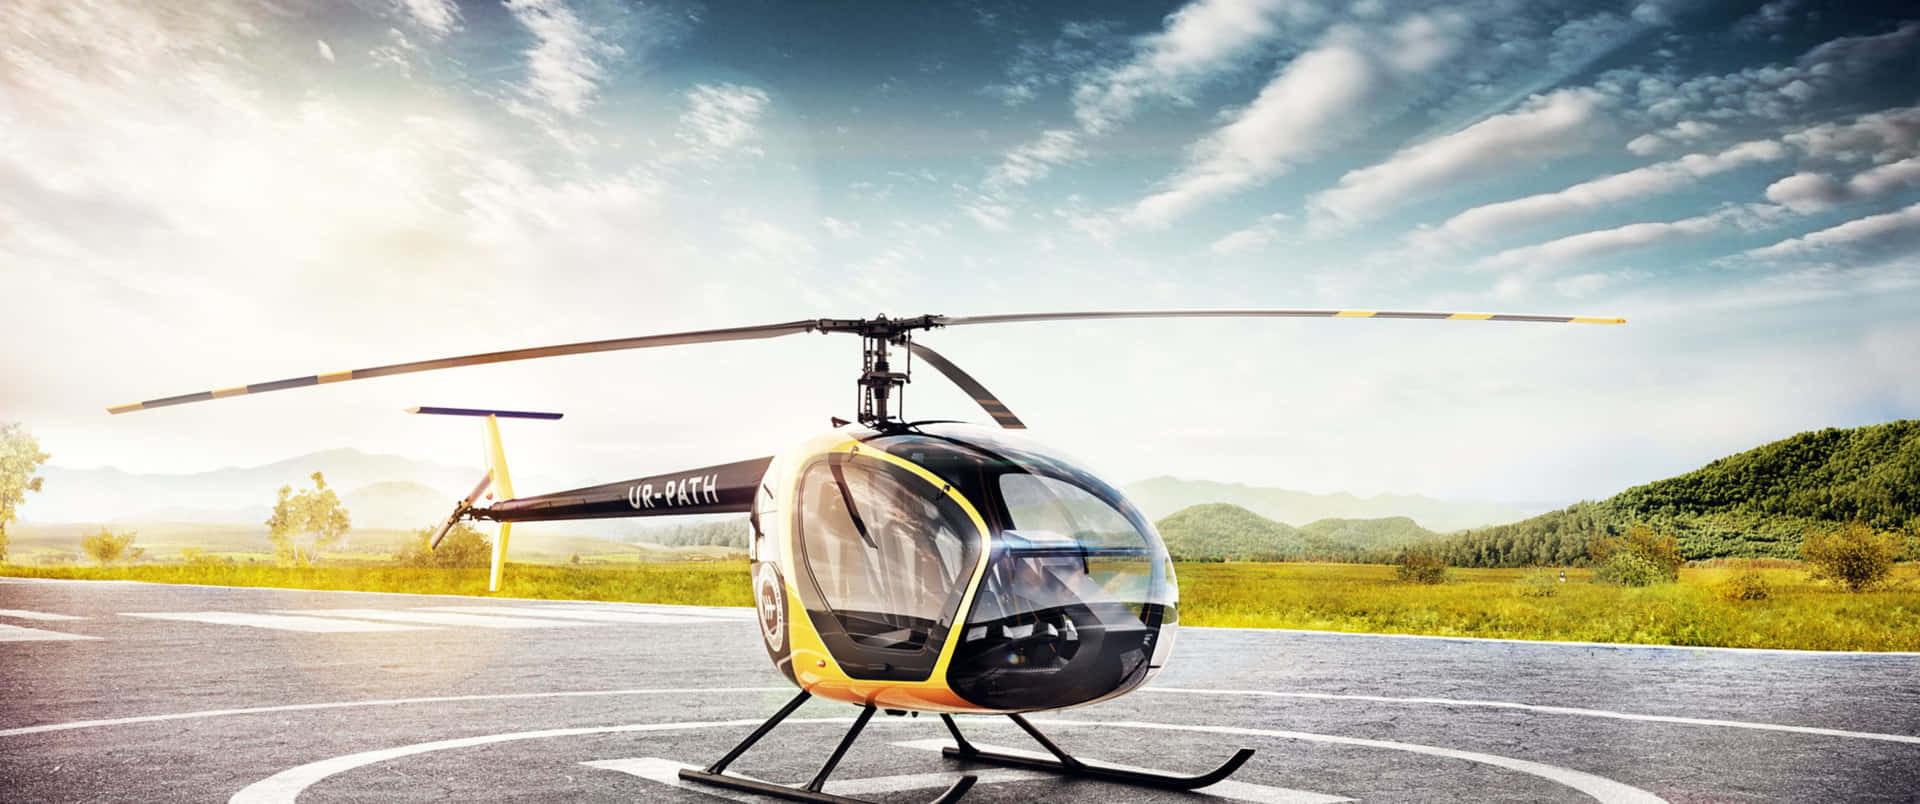 Fly high and keep an eye on the skies with this stunning 3440x1440p Helicopters background.